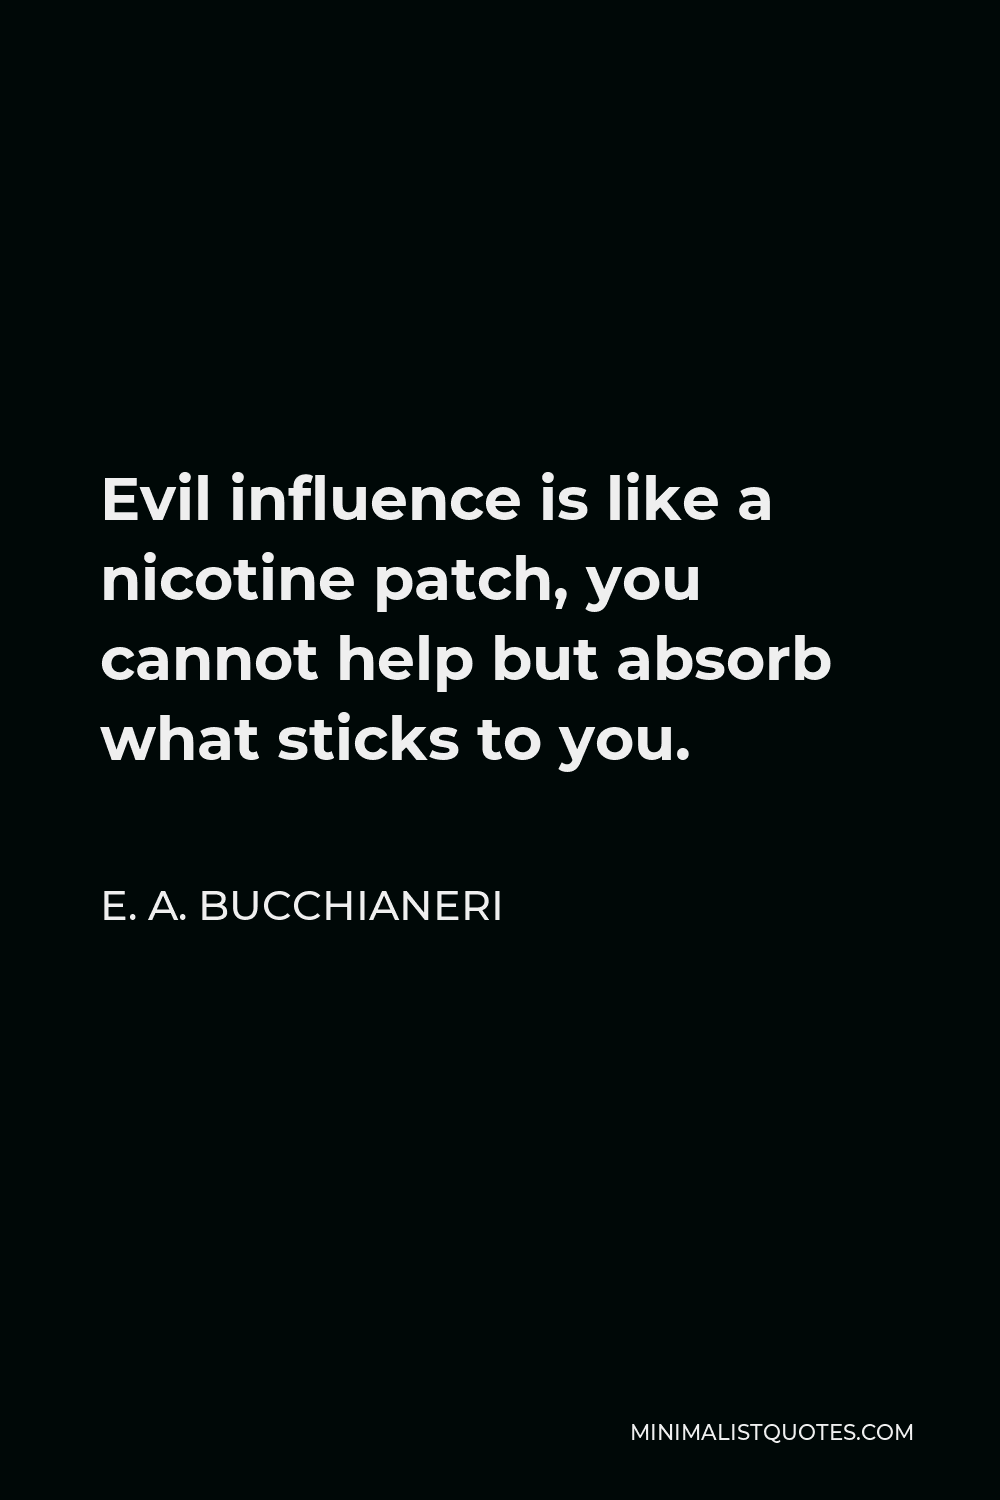 E. A. Bucchianeri Quote - Evil influence is like a nicotine patch, you cannot help but absorb what sticks to you.